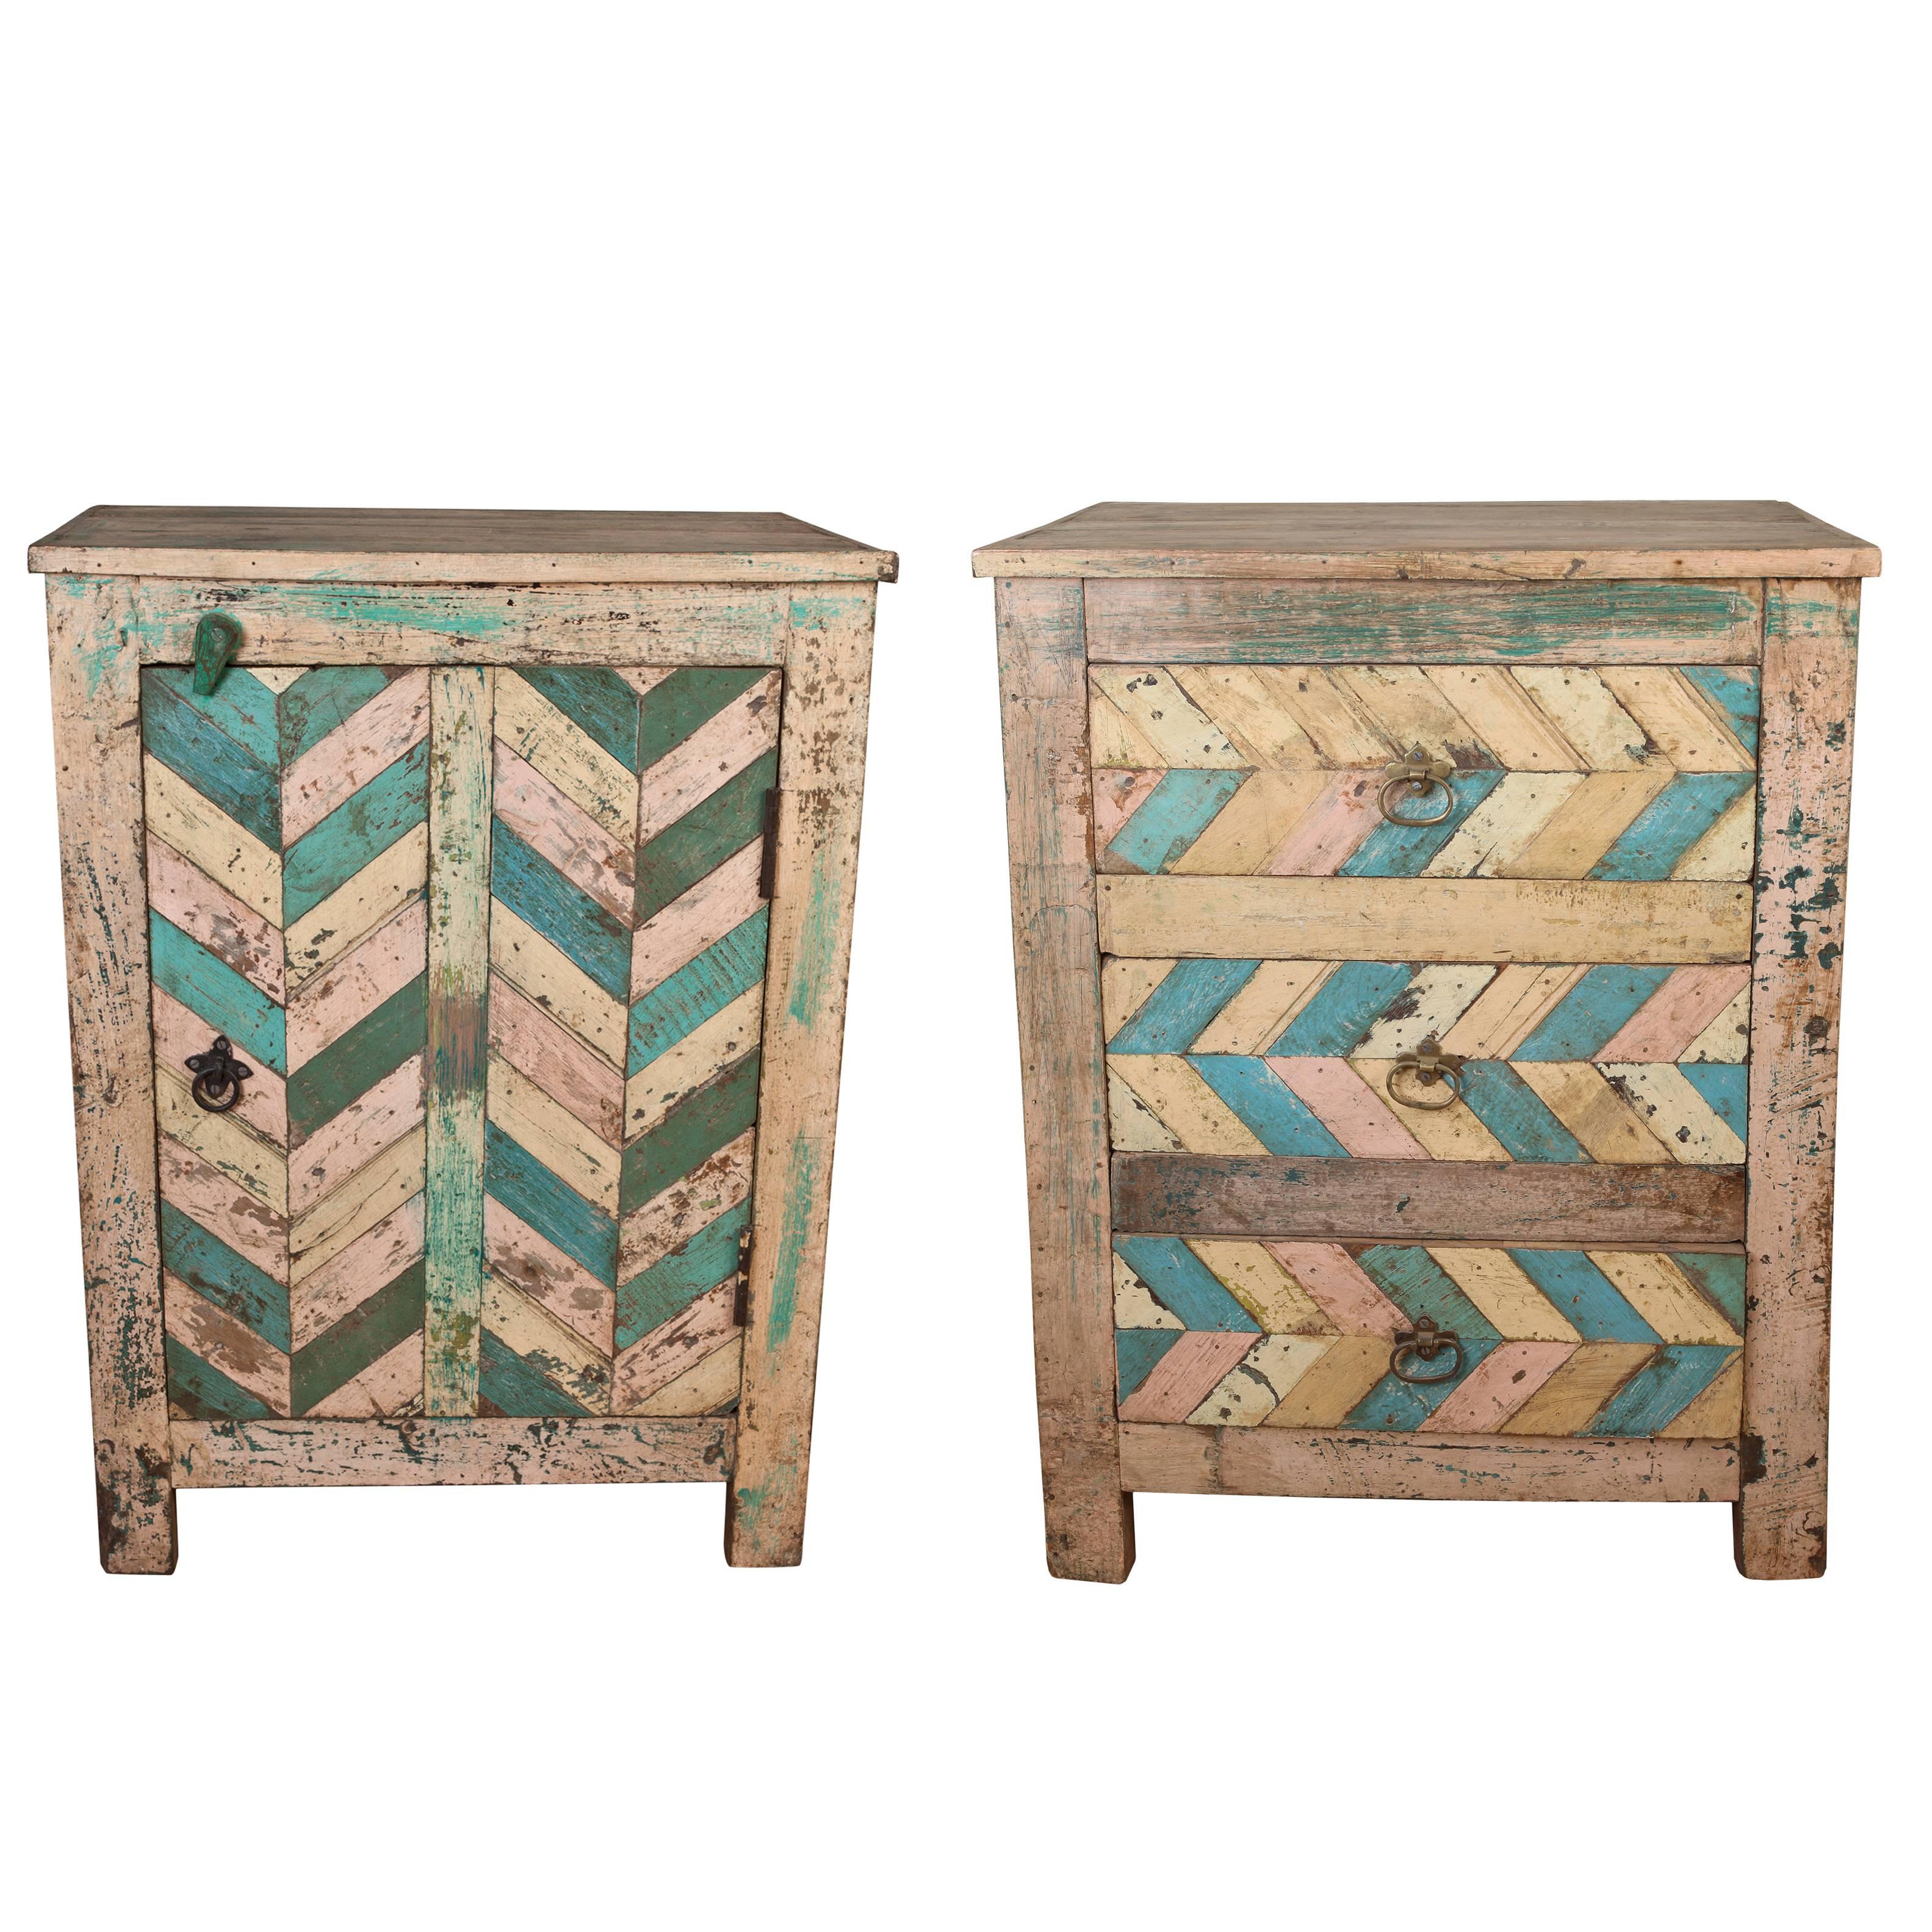 Pair of Reclaimed Wood Side Tables with Original Paint